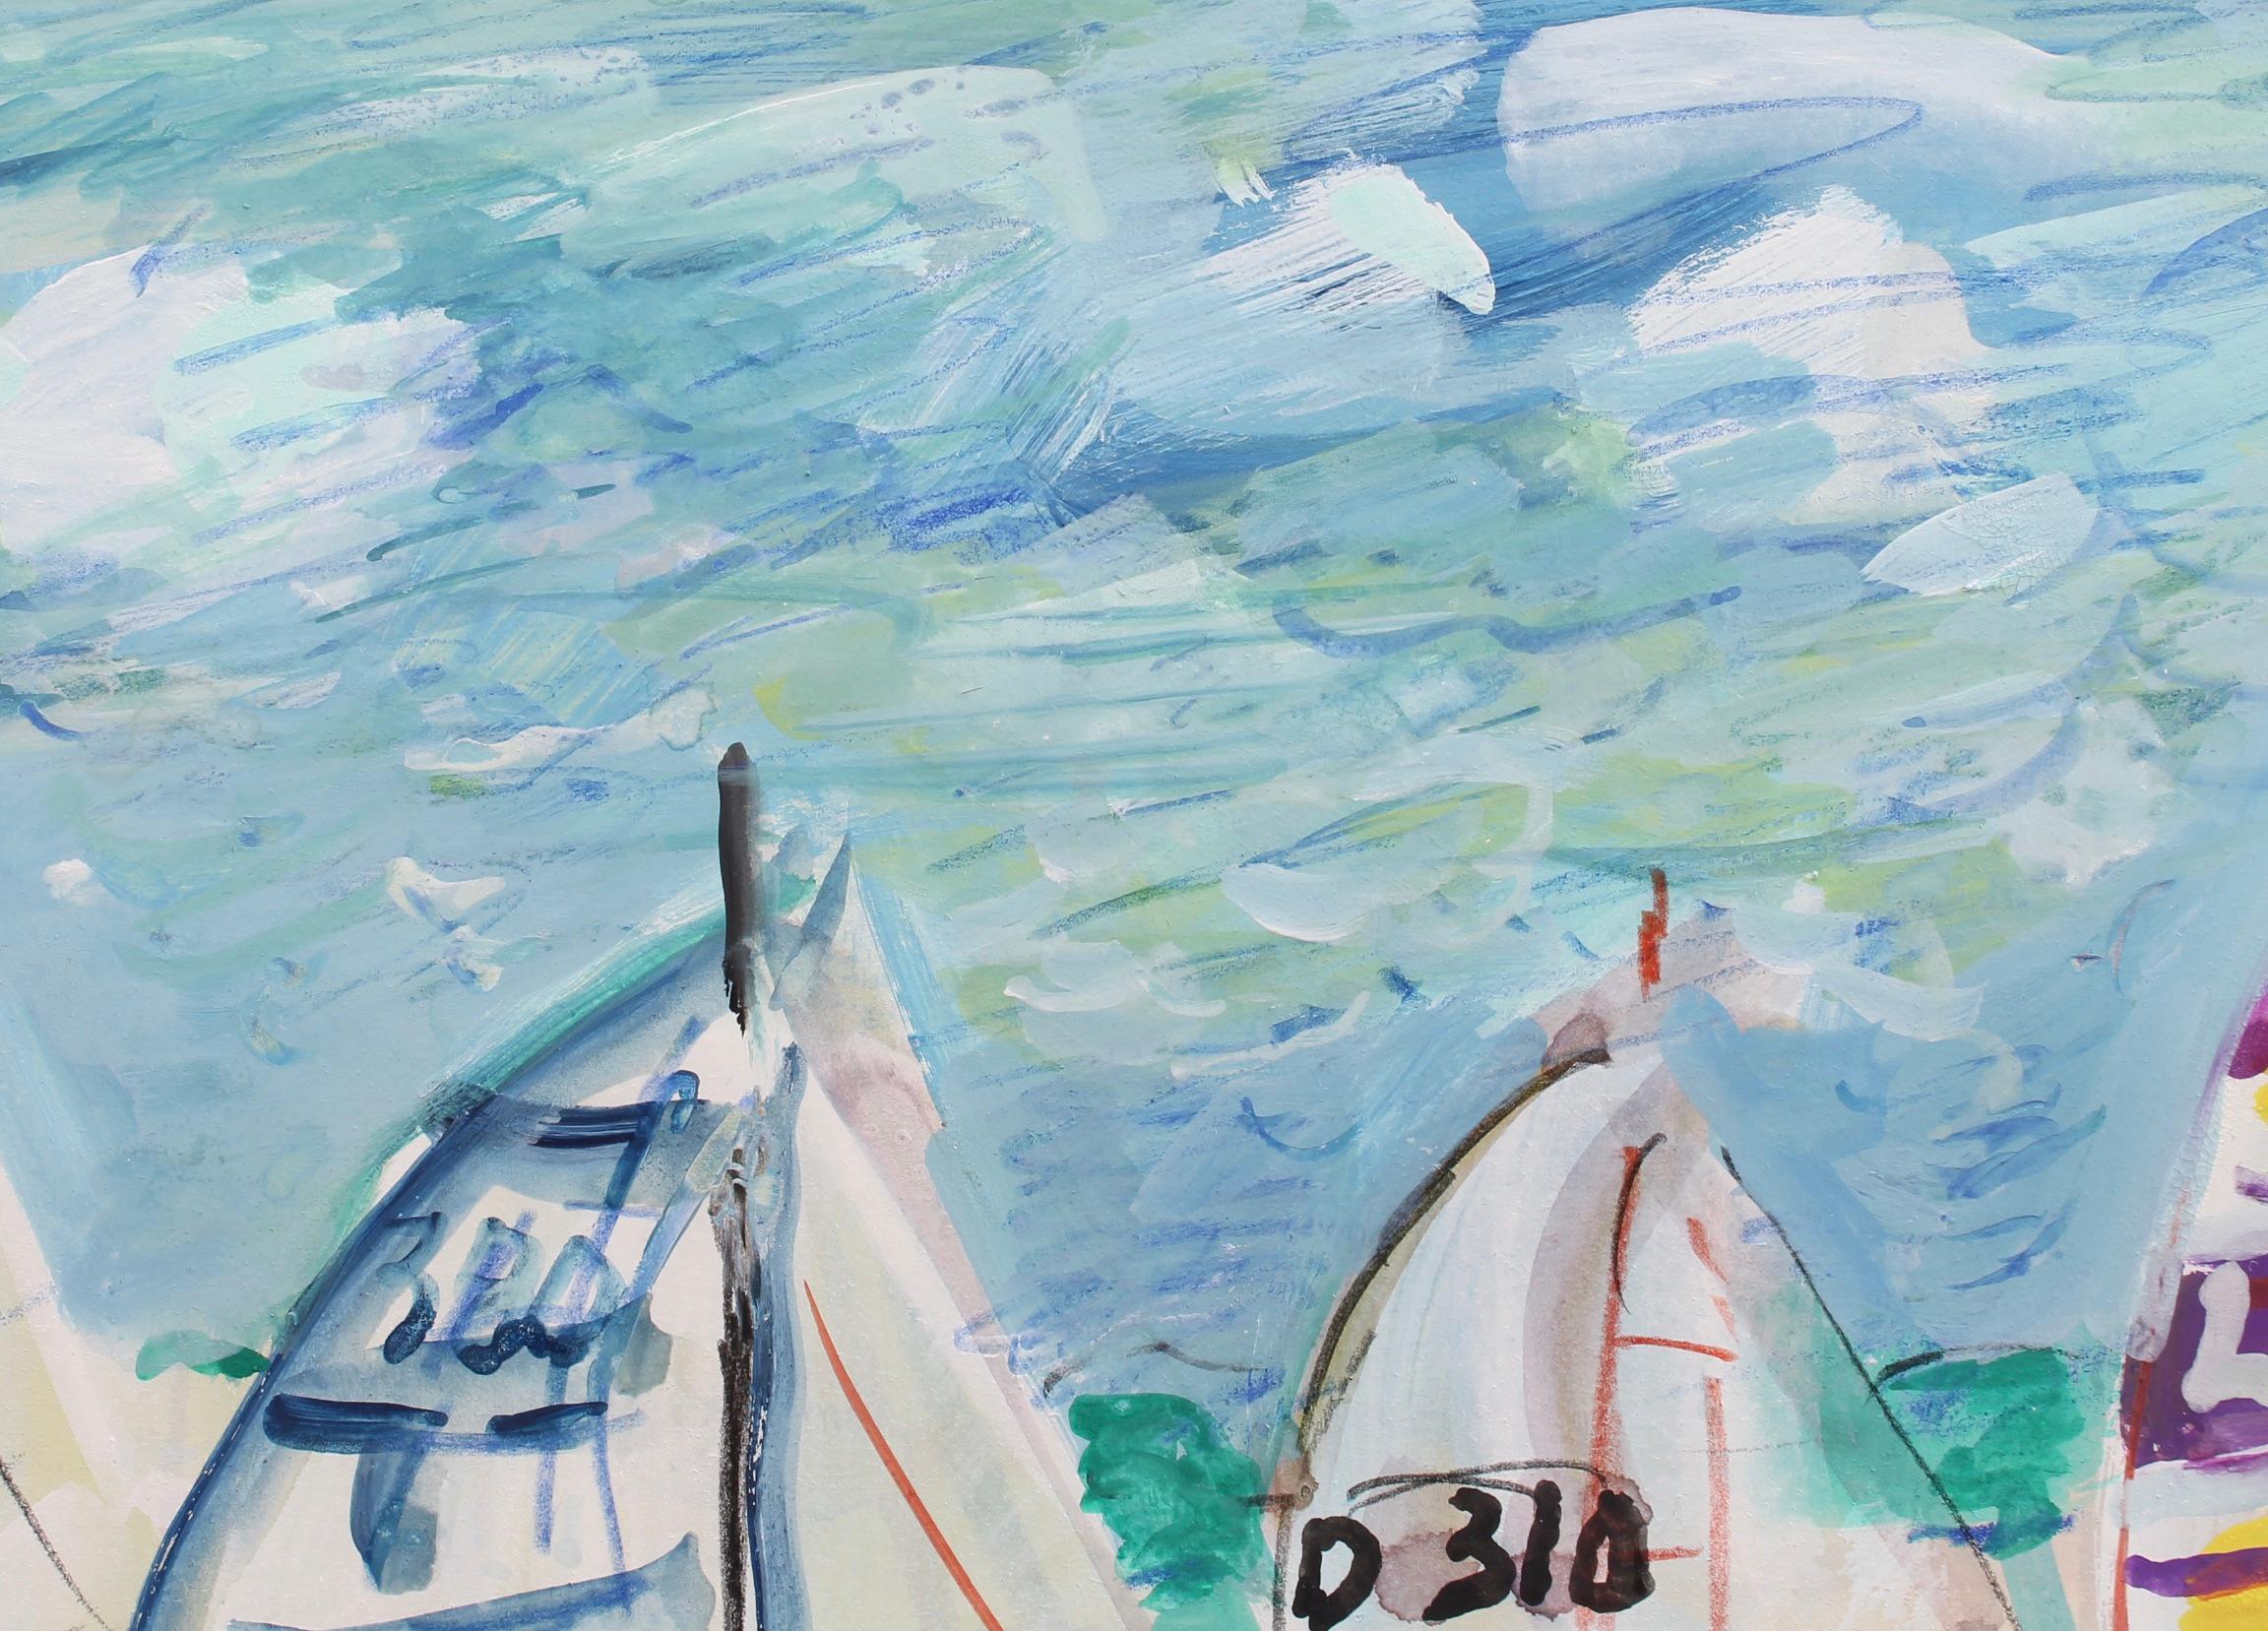 'Spinnakers out at La Trinité Regatta', gouache on paper, by Maurice Empi (circa 1970s). A horn signals the 15 minute countdown to the start of the regatta. The moments that lead up to the start of a sailboat race are absolutely nerve-racking. Each